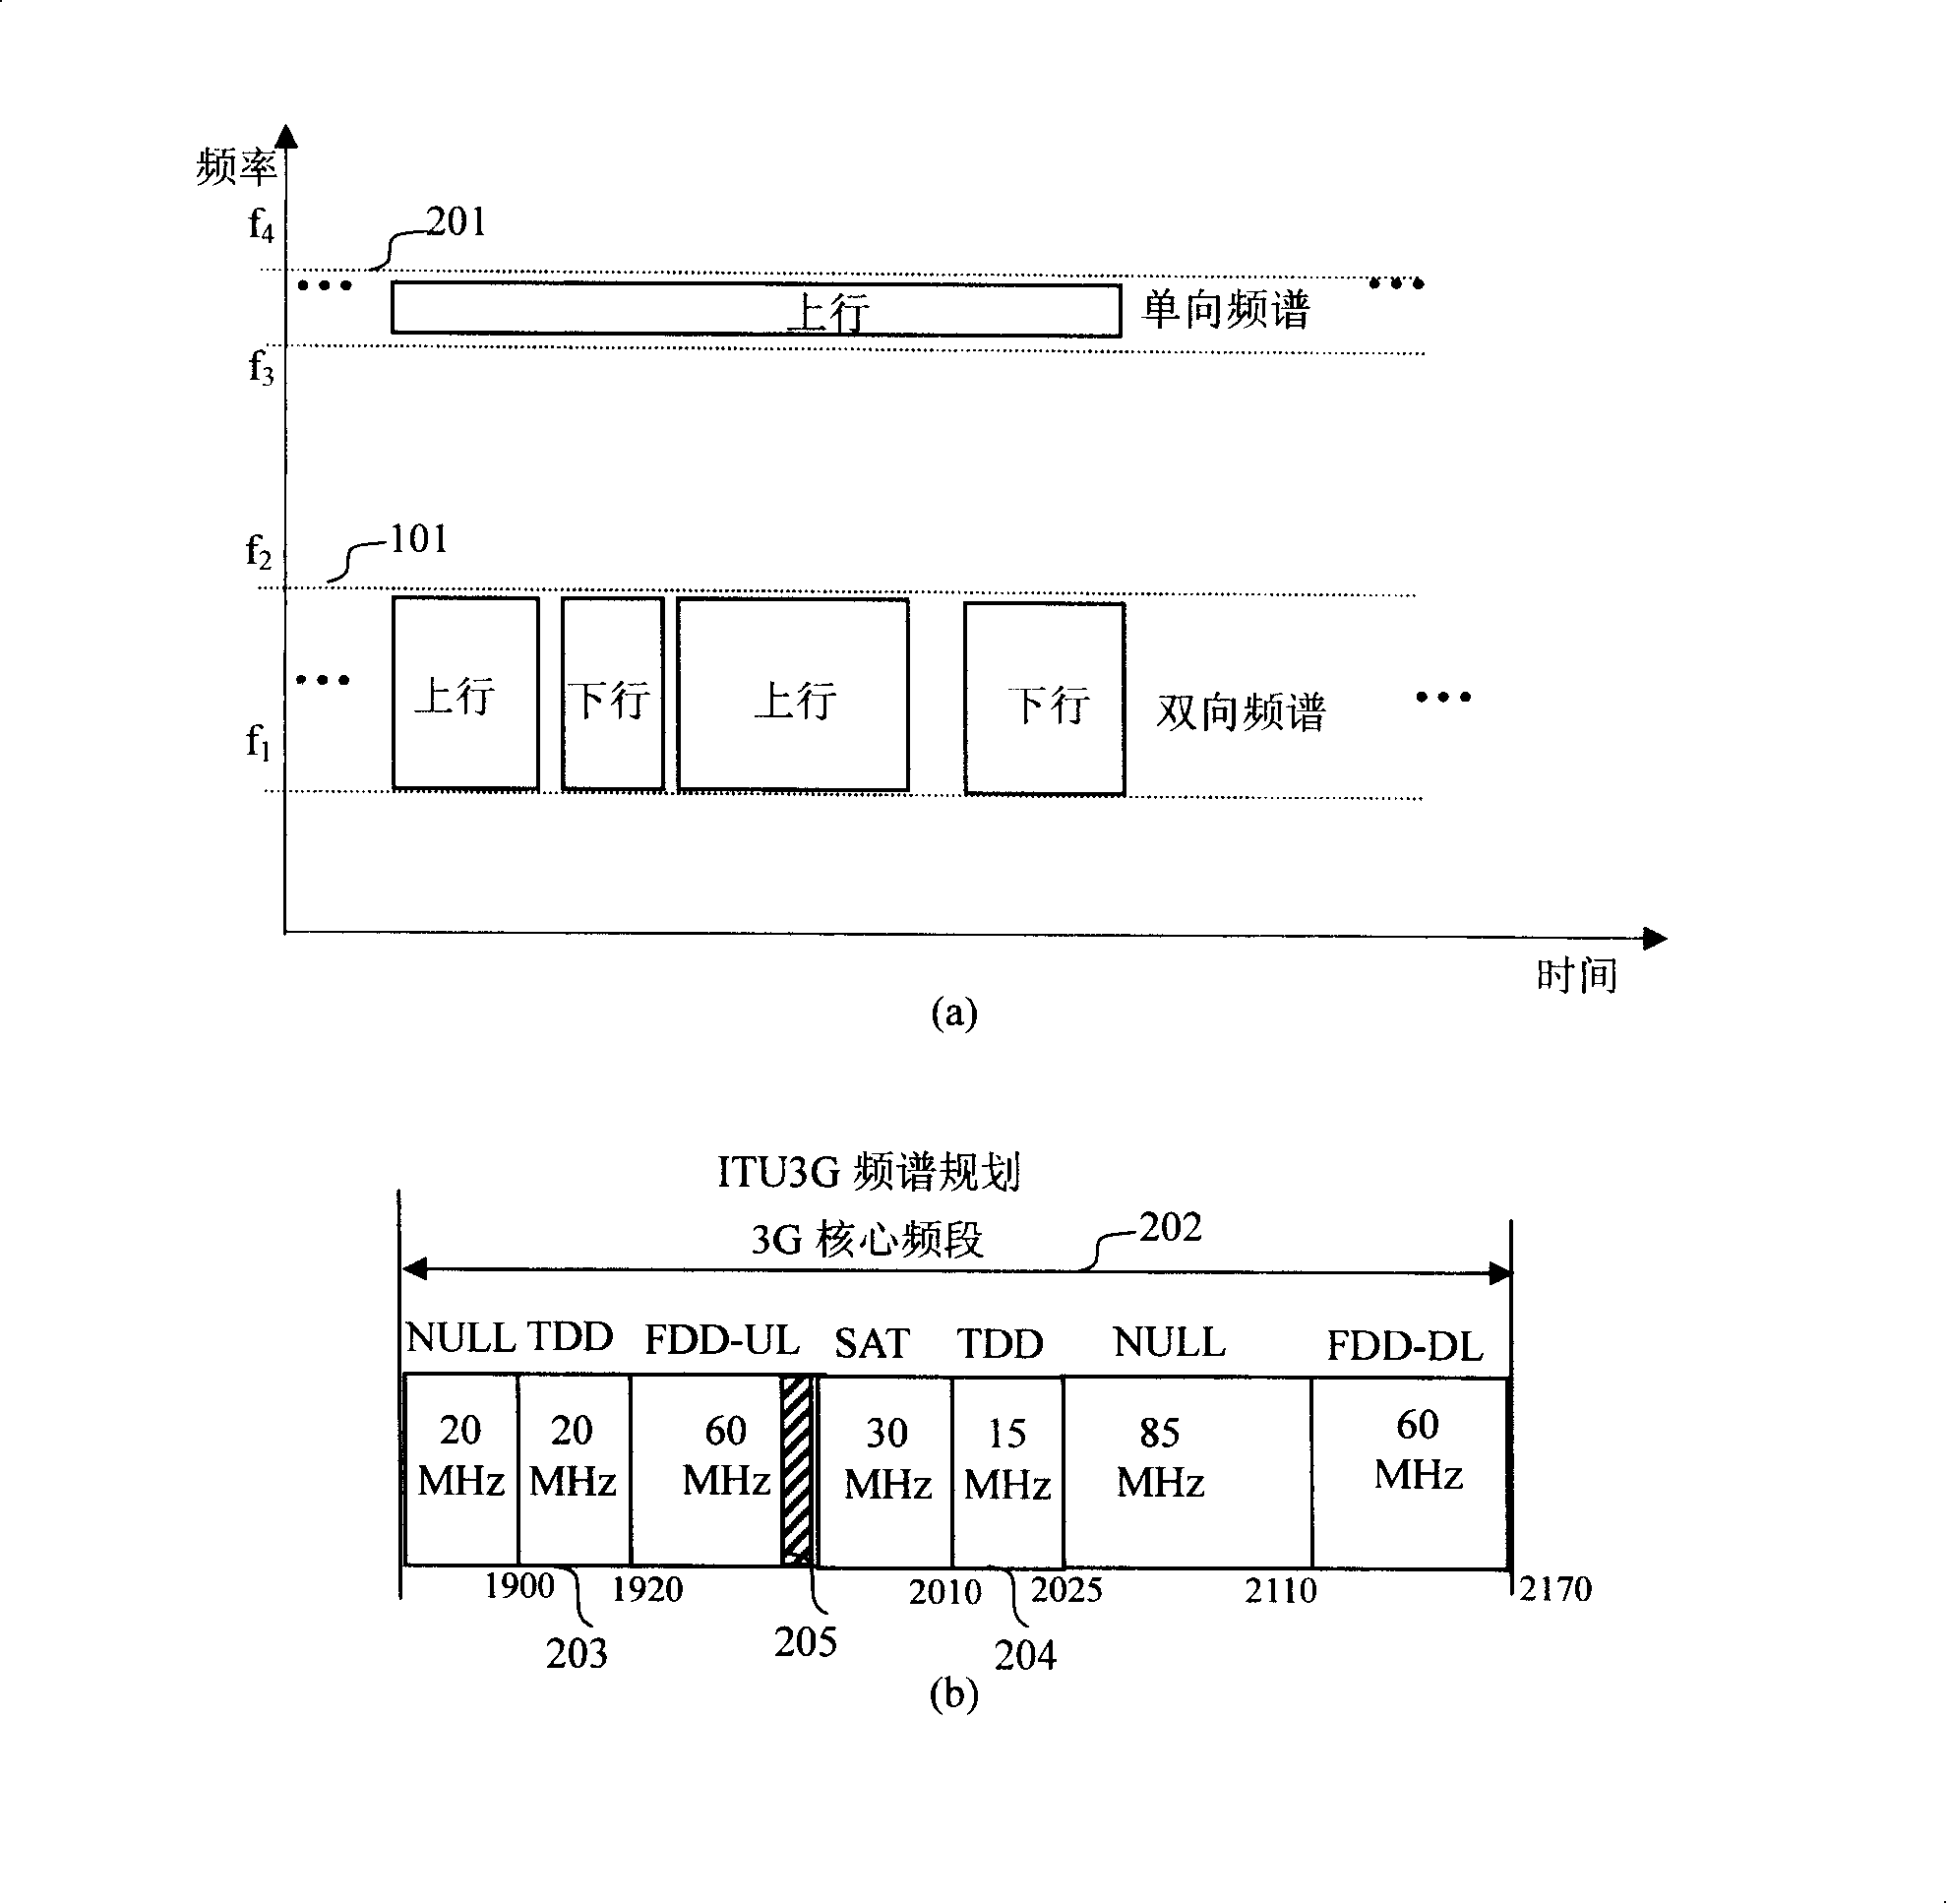 Method and system for improving downlink feedback capability of TDD system